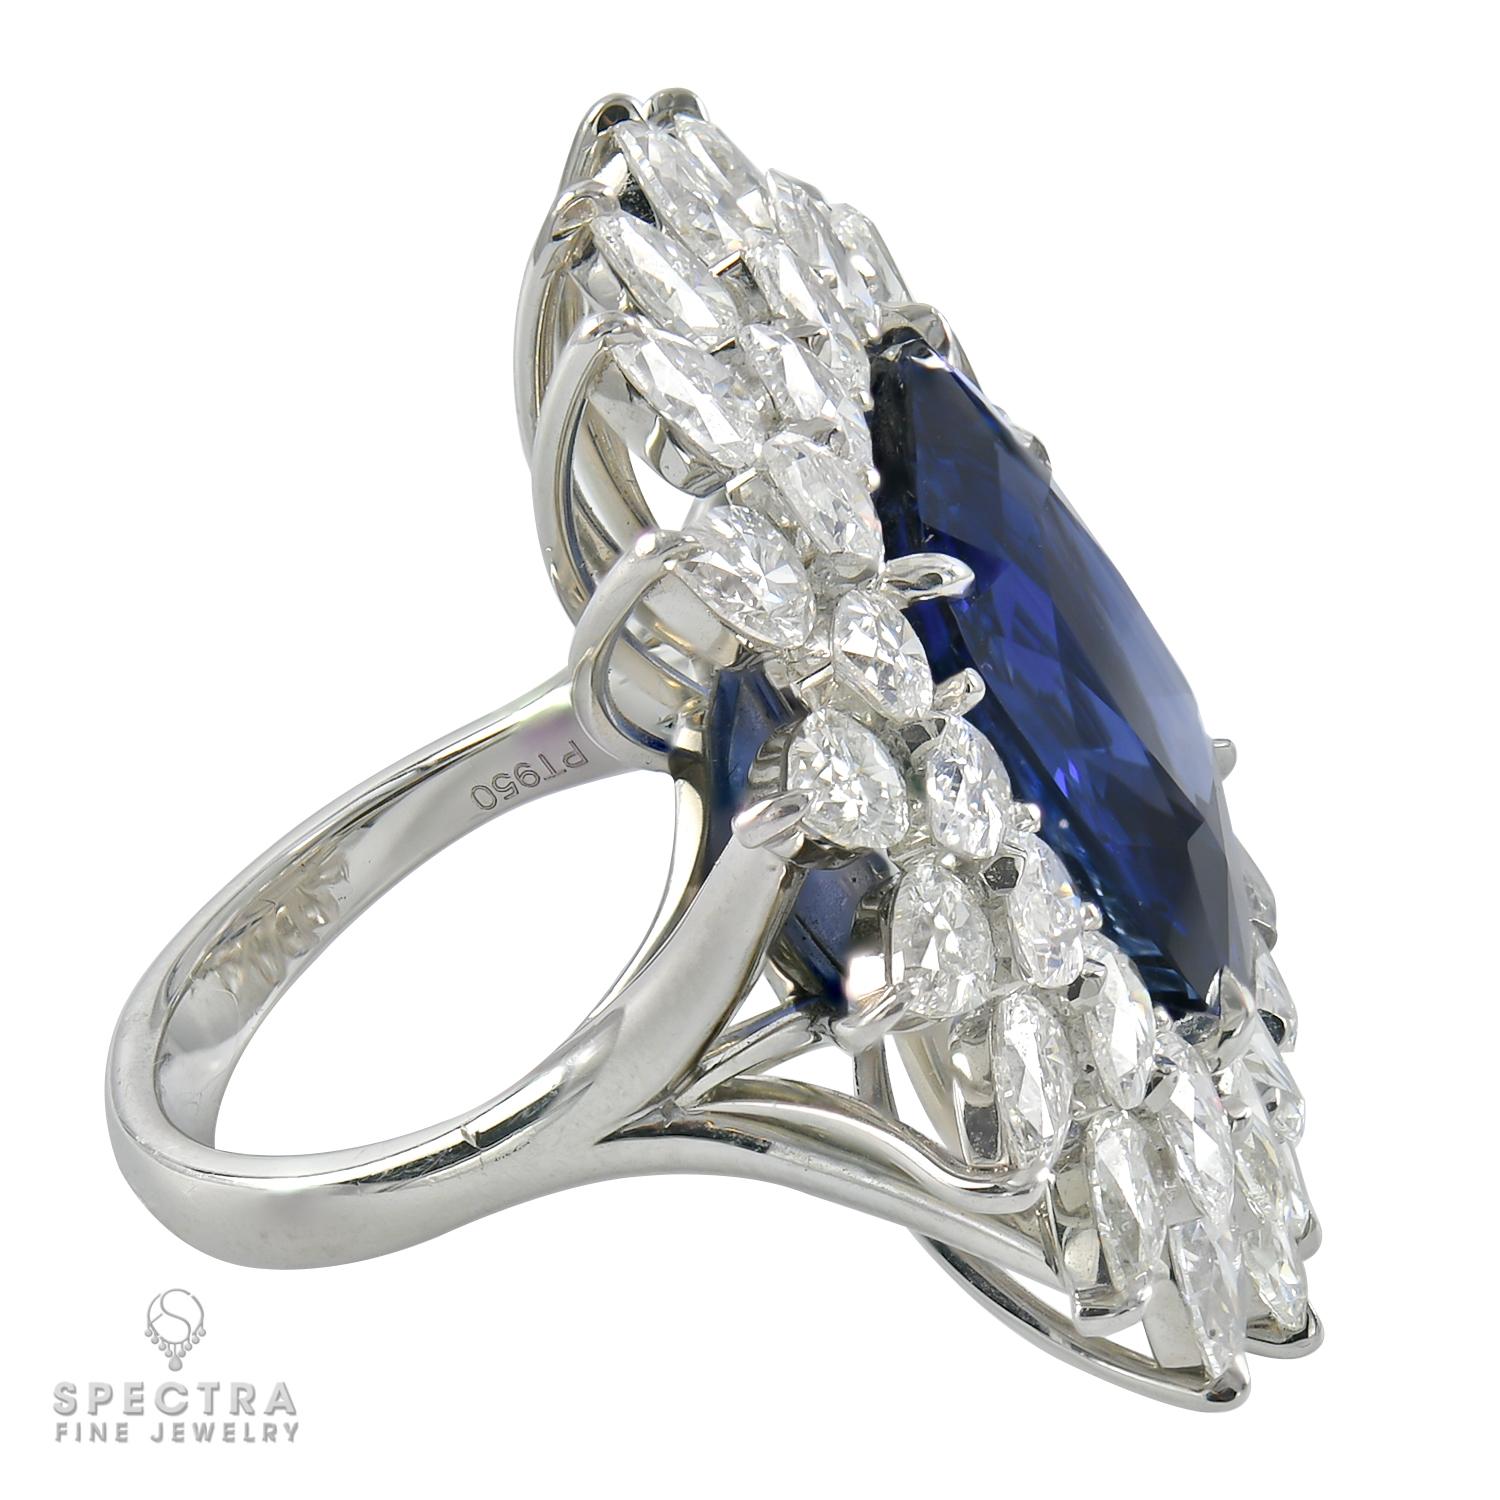 Cushion Cut Spectra Fine Jewelry Certified 15.67 Carat Sapphire Diamond Cocktail Ring For Sale